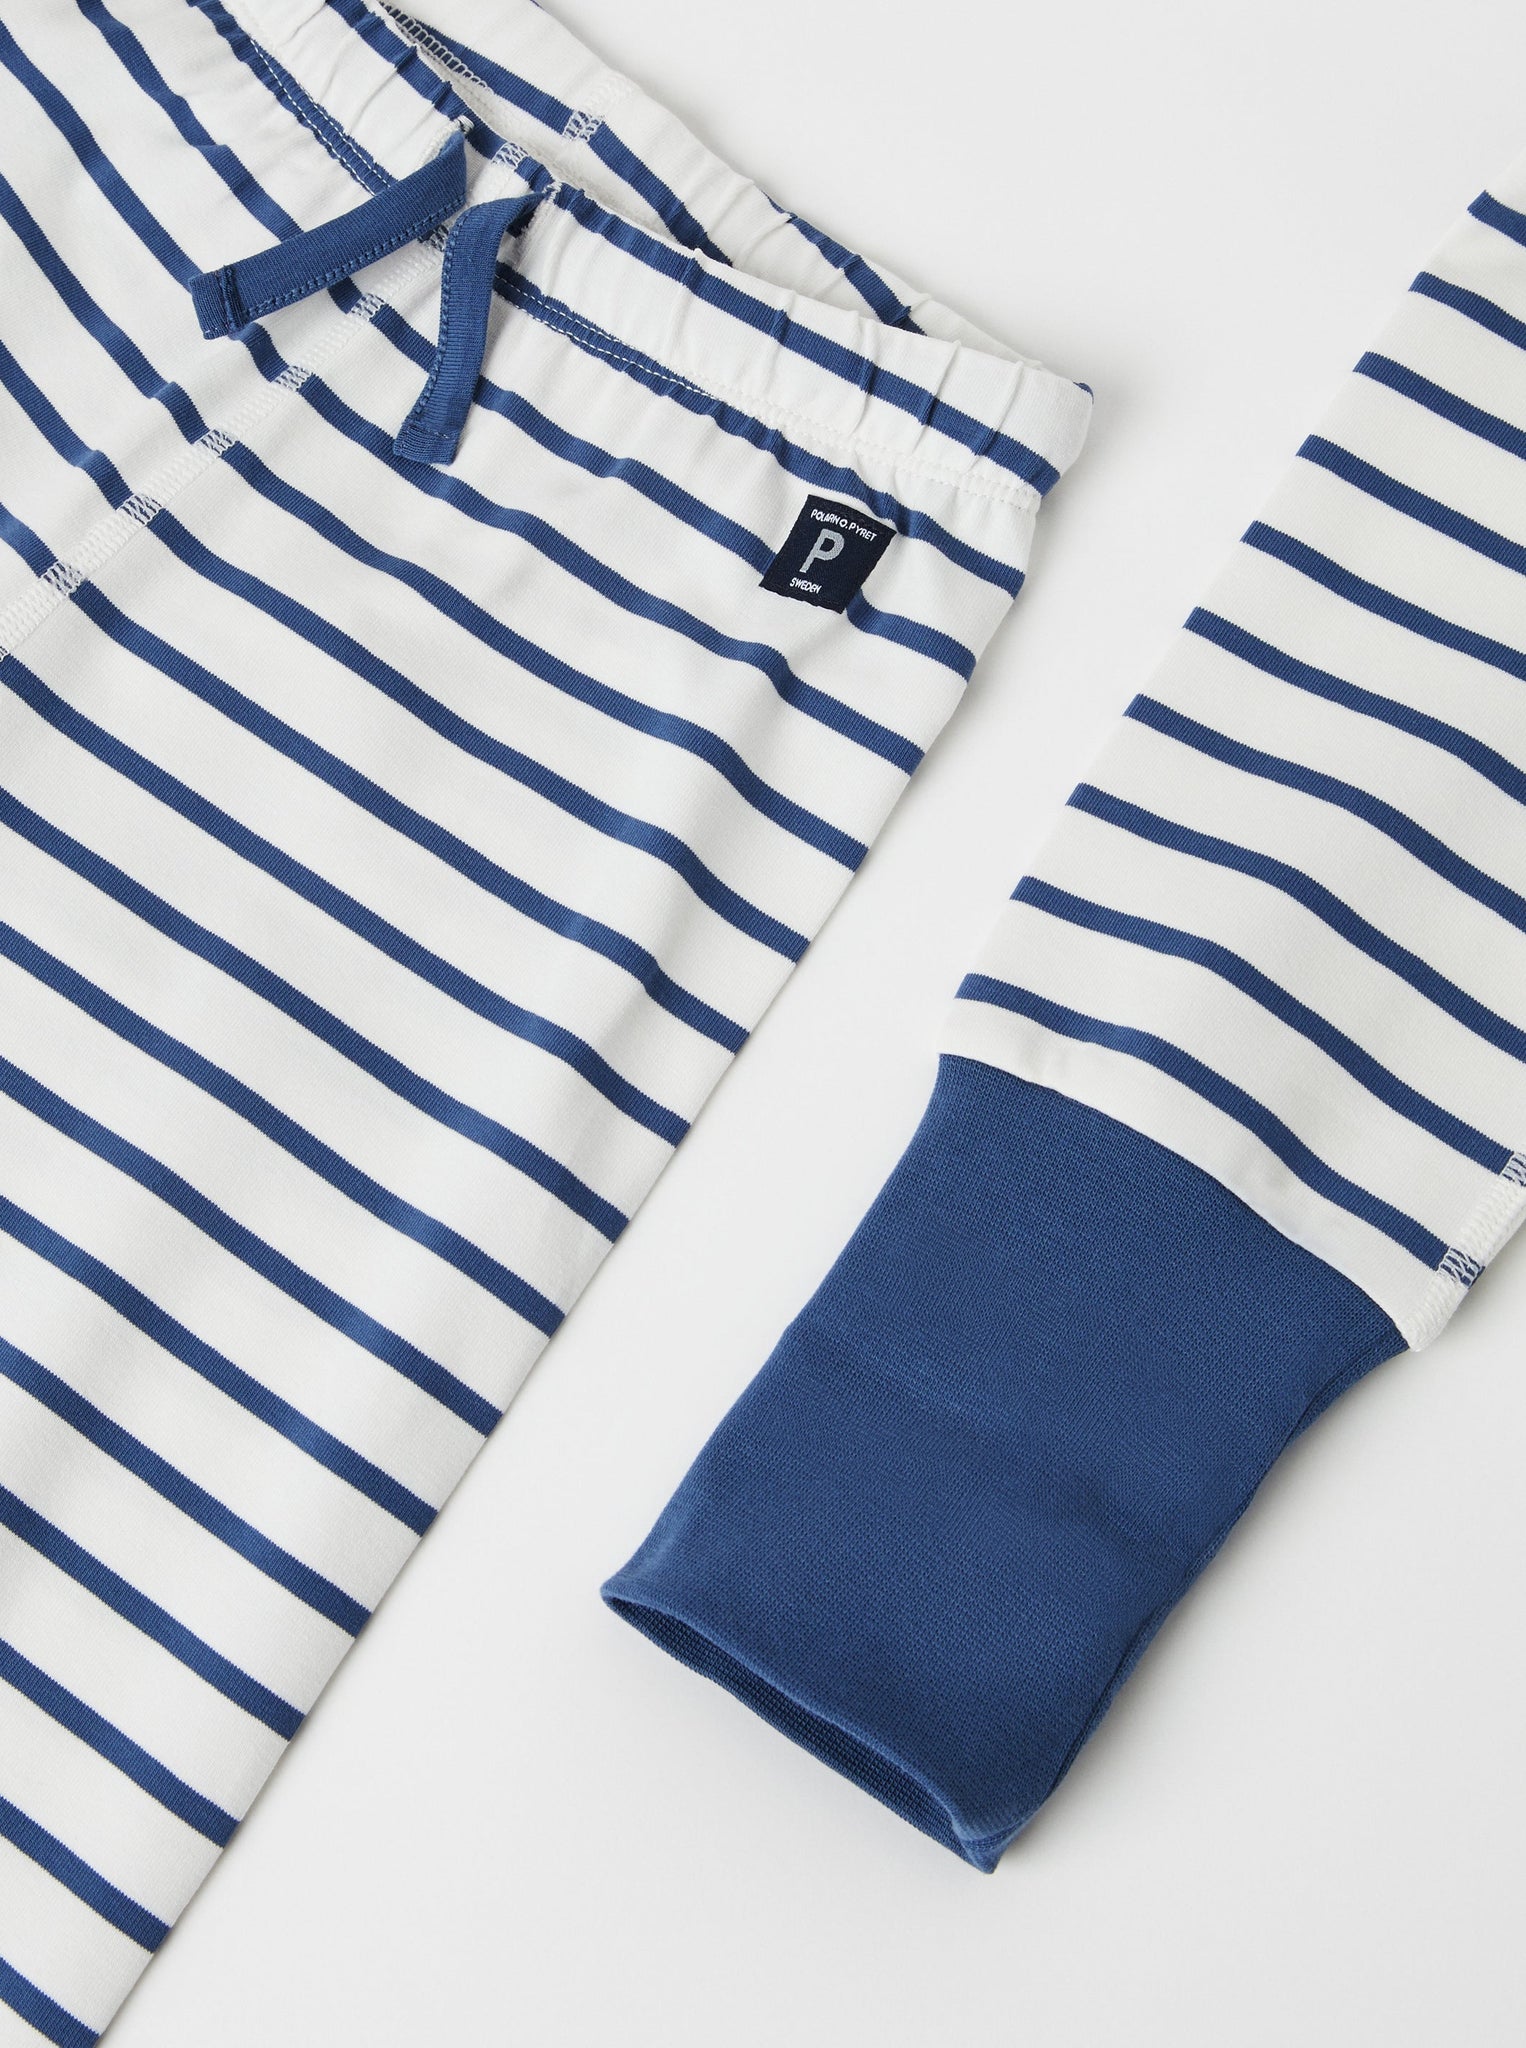 Organic Cotton Striped Kids Pyjamas from the Polarn O. Pyret kidswear collection. Nordic kids clothes made from sustainable sources.